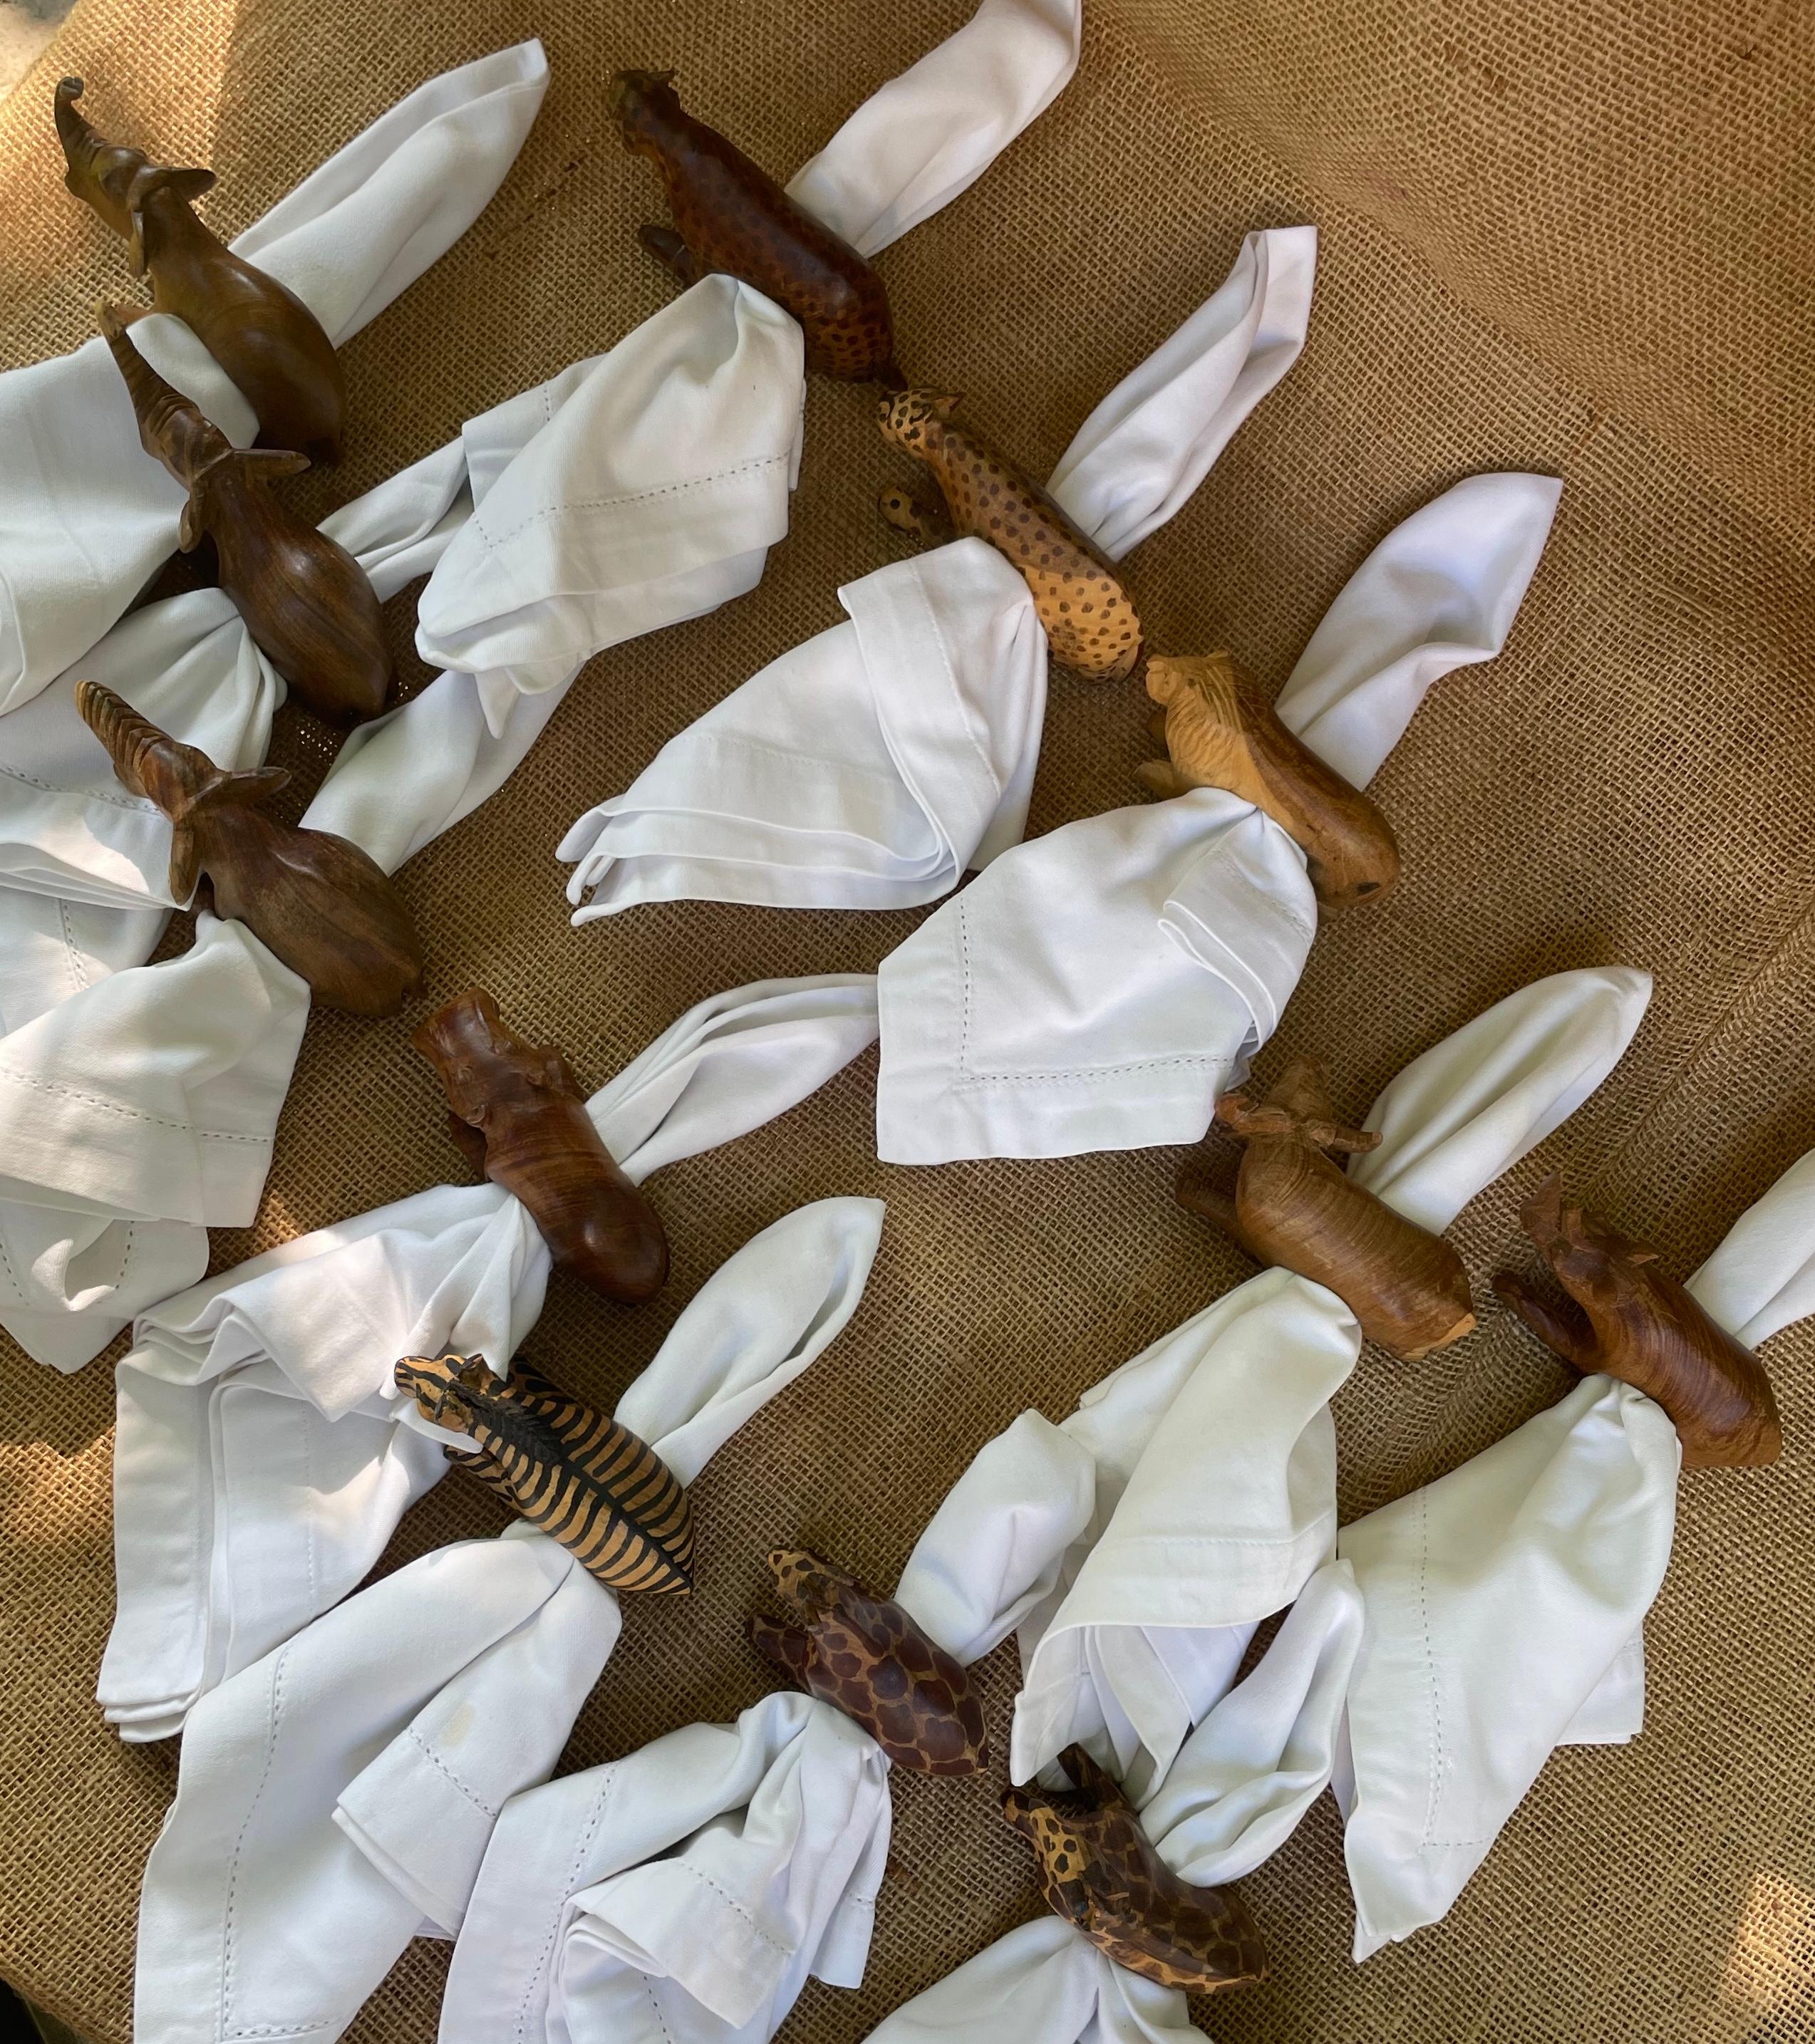 Set of twelve African Safari napkin rings. Hand carved and stained olive wood figures with integral rings from Kenya consisting of pair cheetah, pair giraffe, pair elephants and a baby, hippo, lion, water buffalo, zebra and a rhinoceros. Mount Kenya